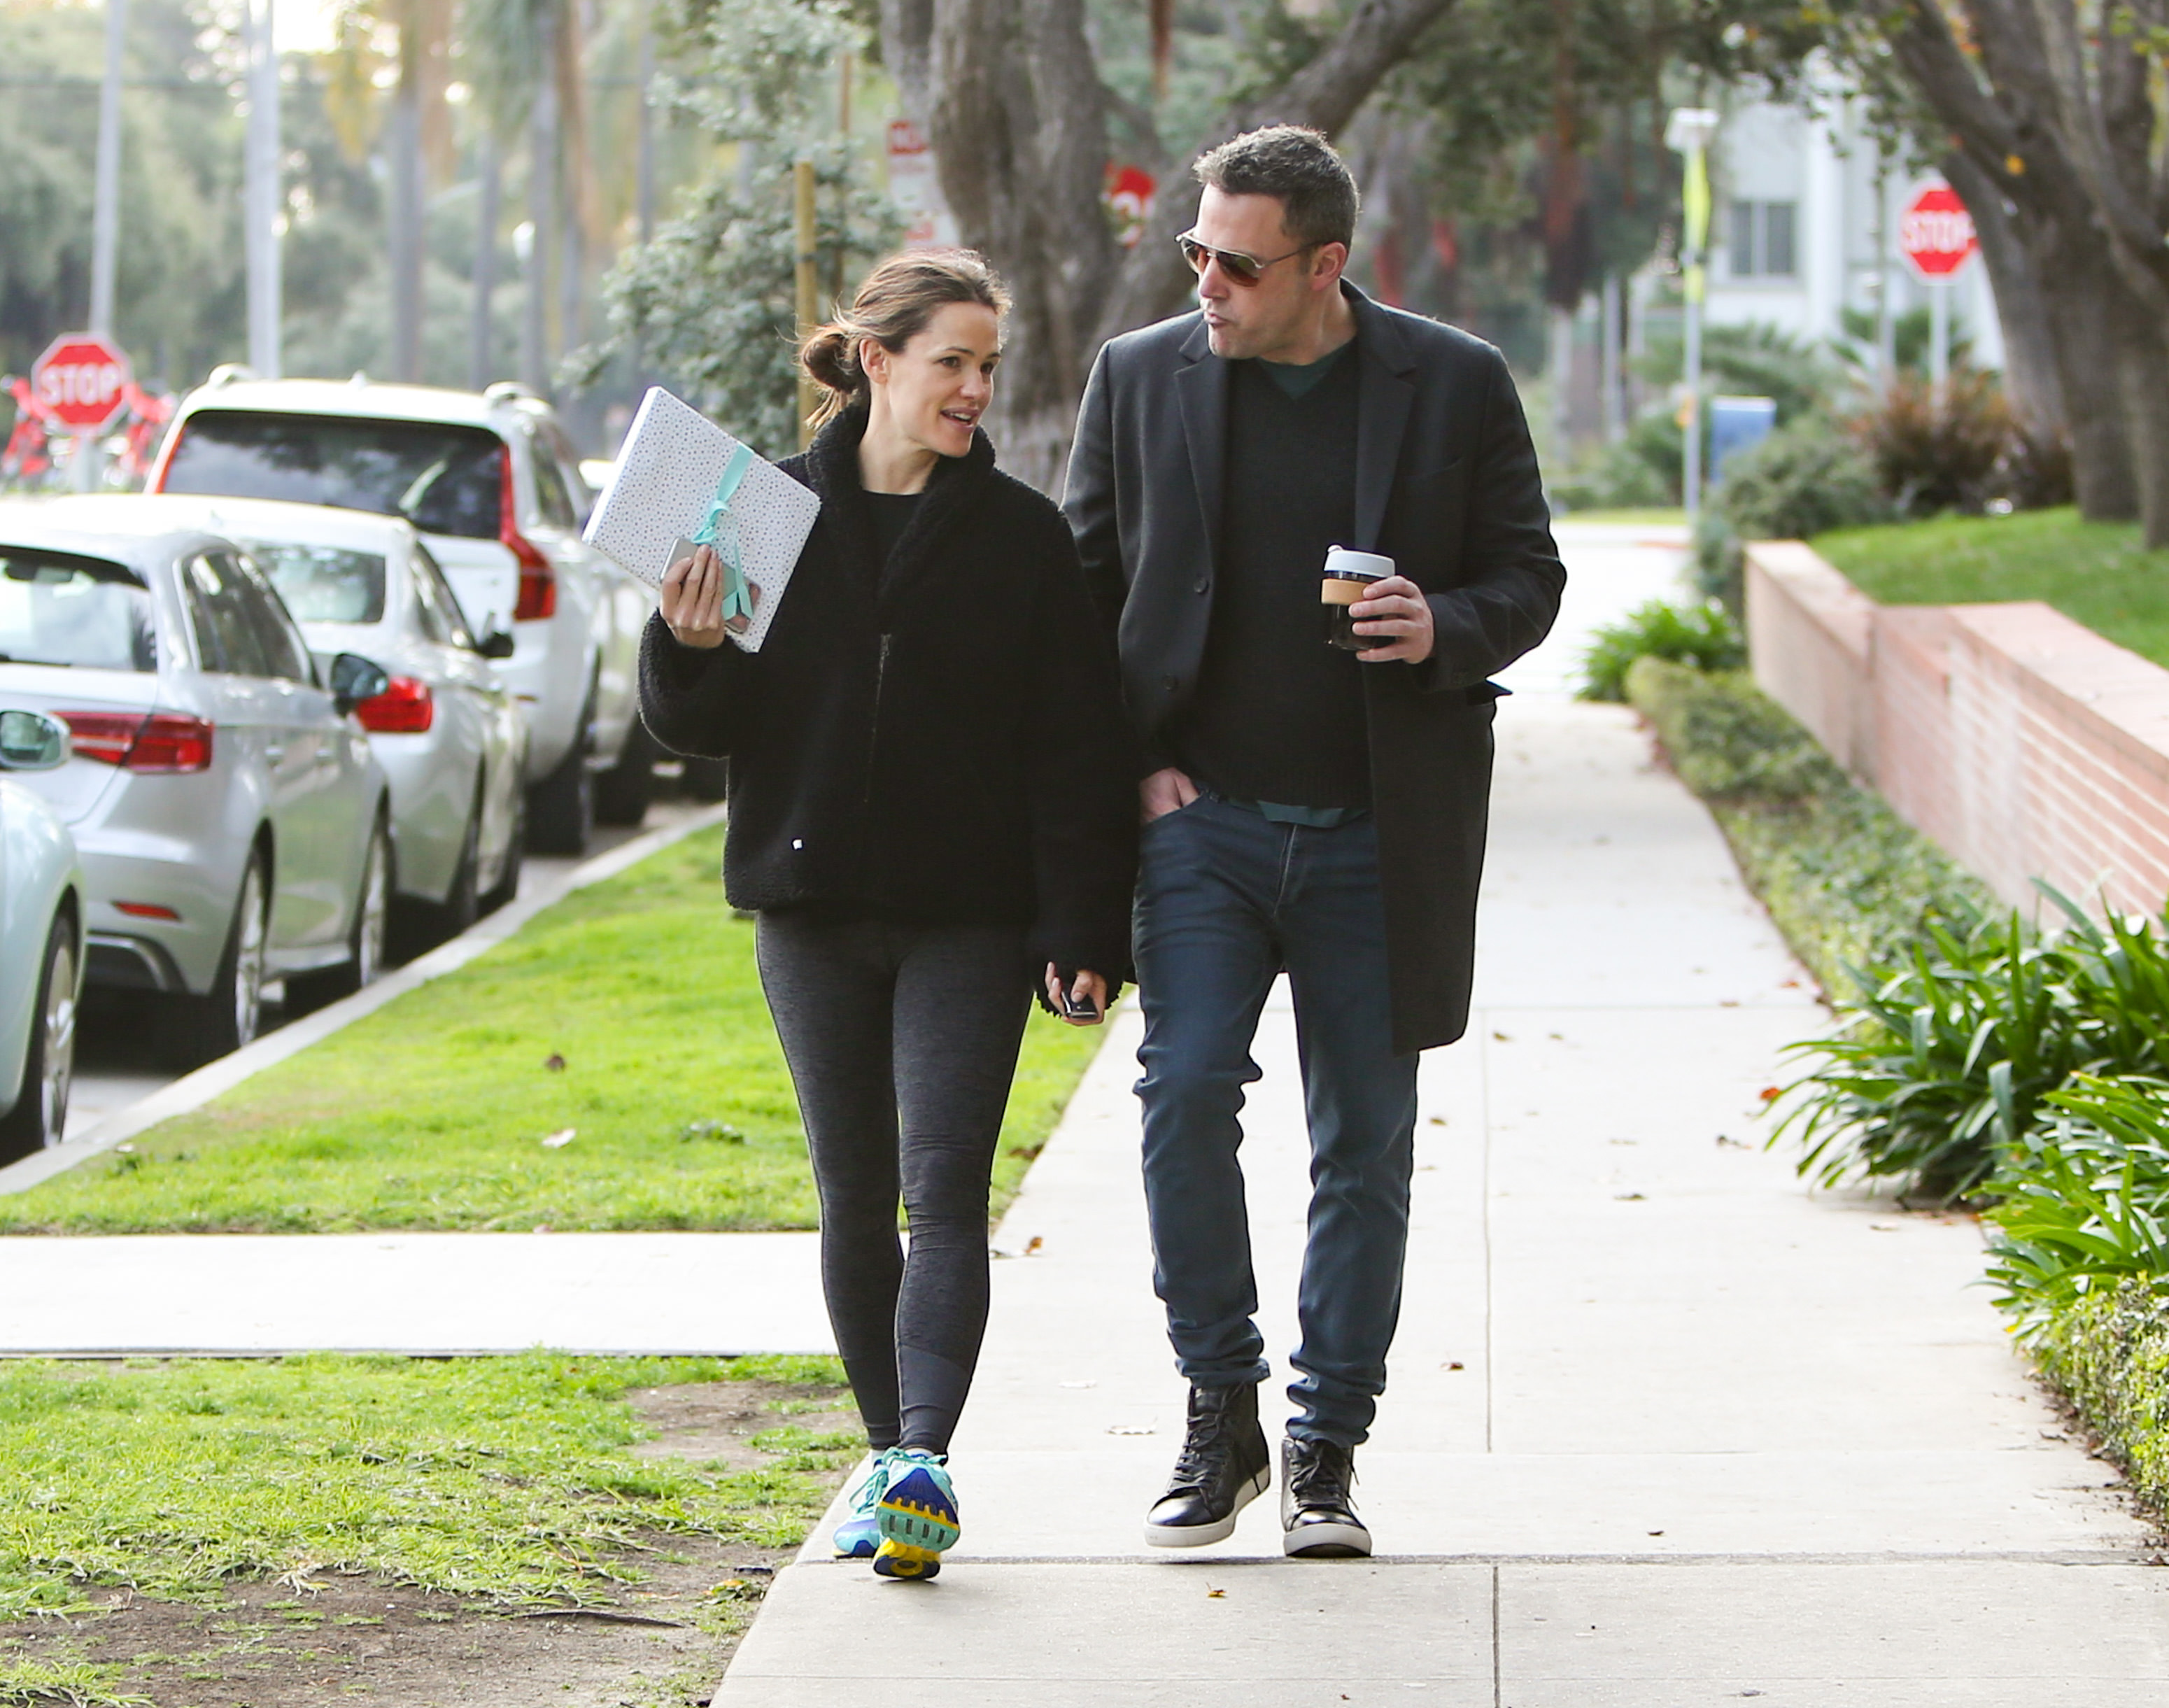 Jennifer Garner and Ben Affleck spotted in Los Angeles, California on February 27, 2019 | Source: Getty Images